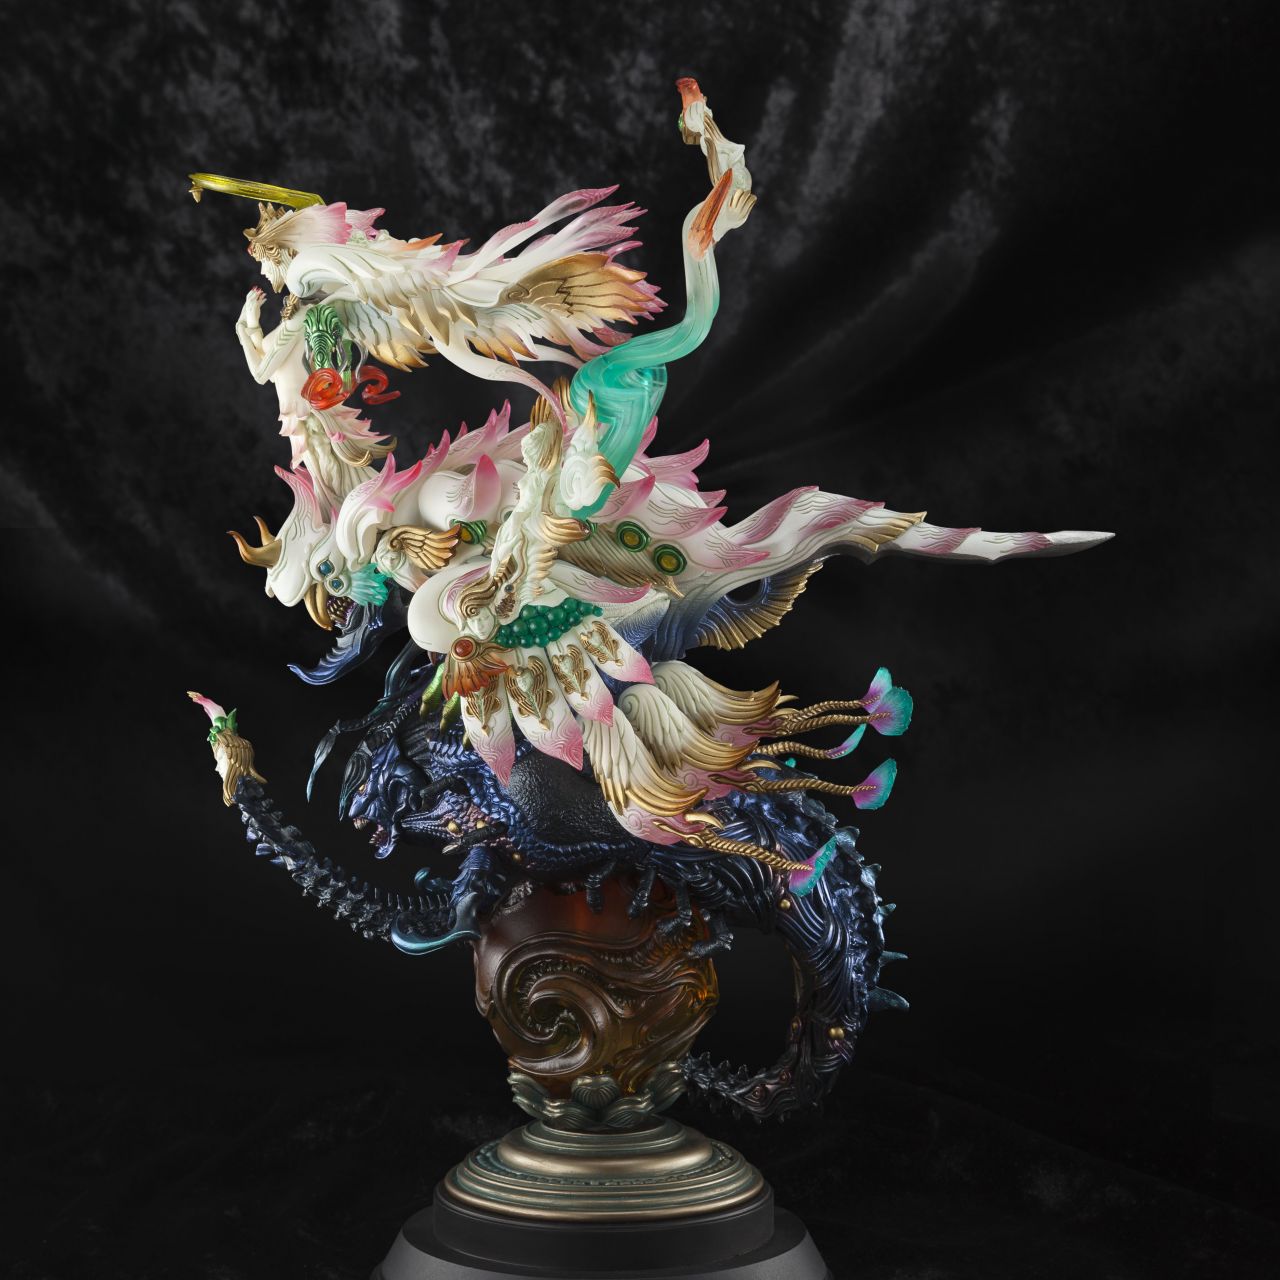 FINAL FANTASY XIV MEISTER QUALITY FIGURE - Ultima, the High Seraph. 